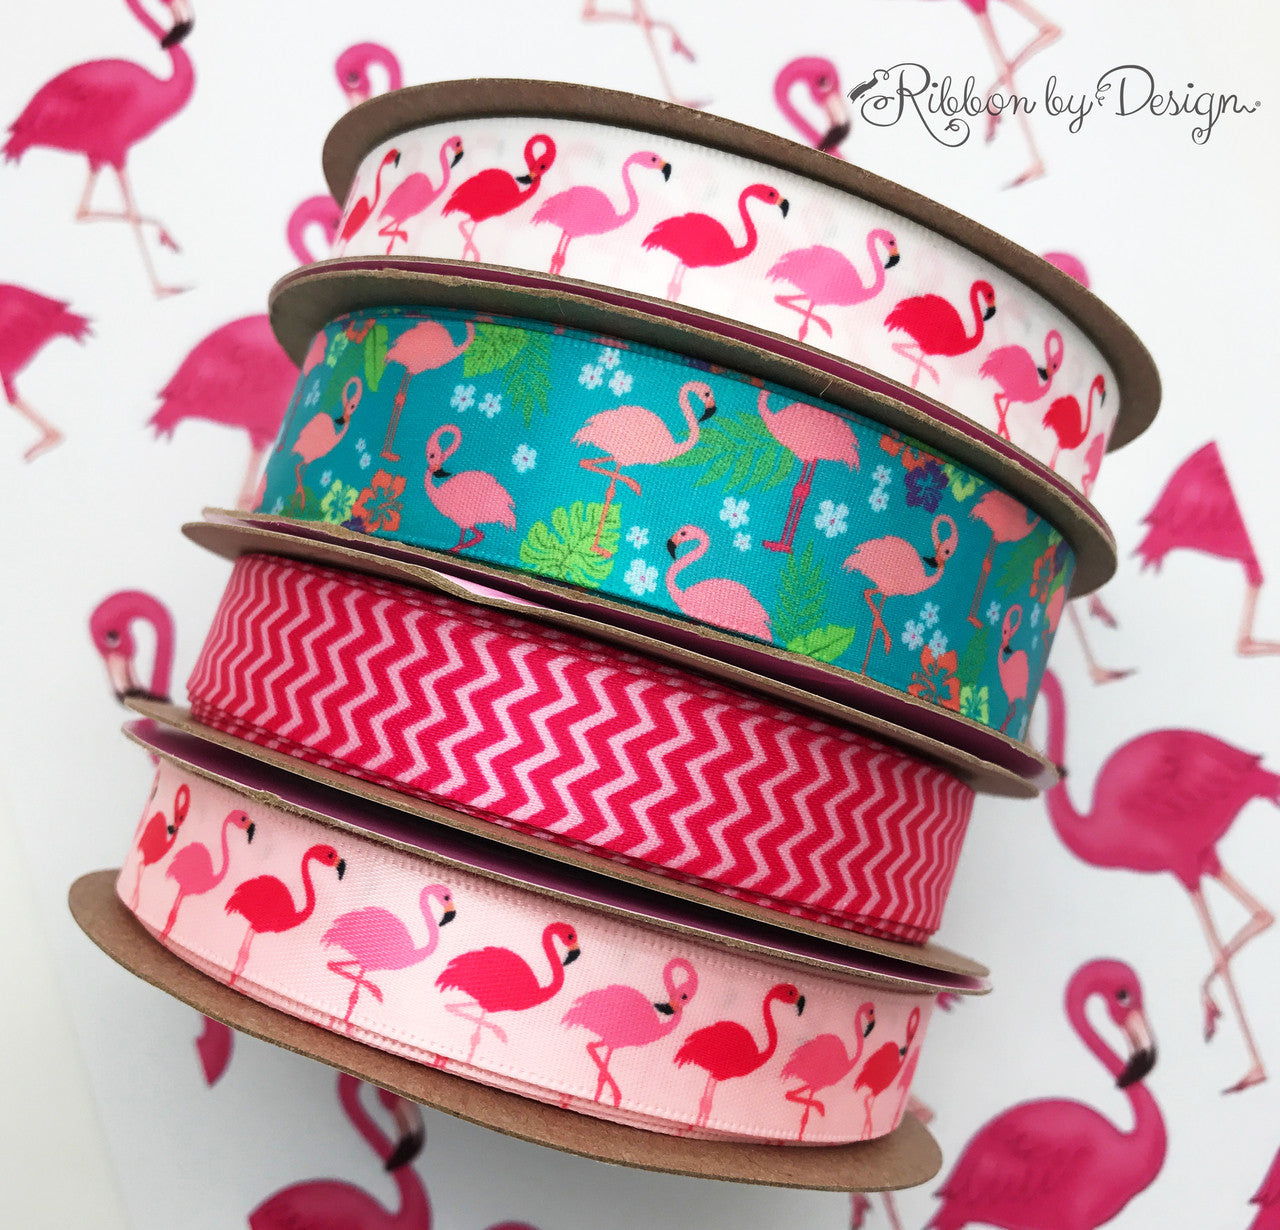 These bright and fun flamingo ribbons are ready for a summer time party!